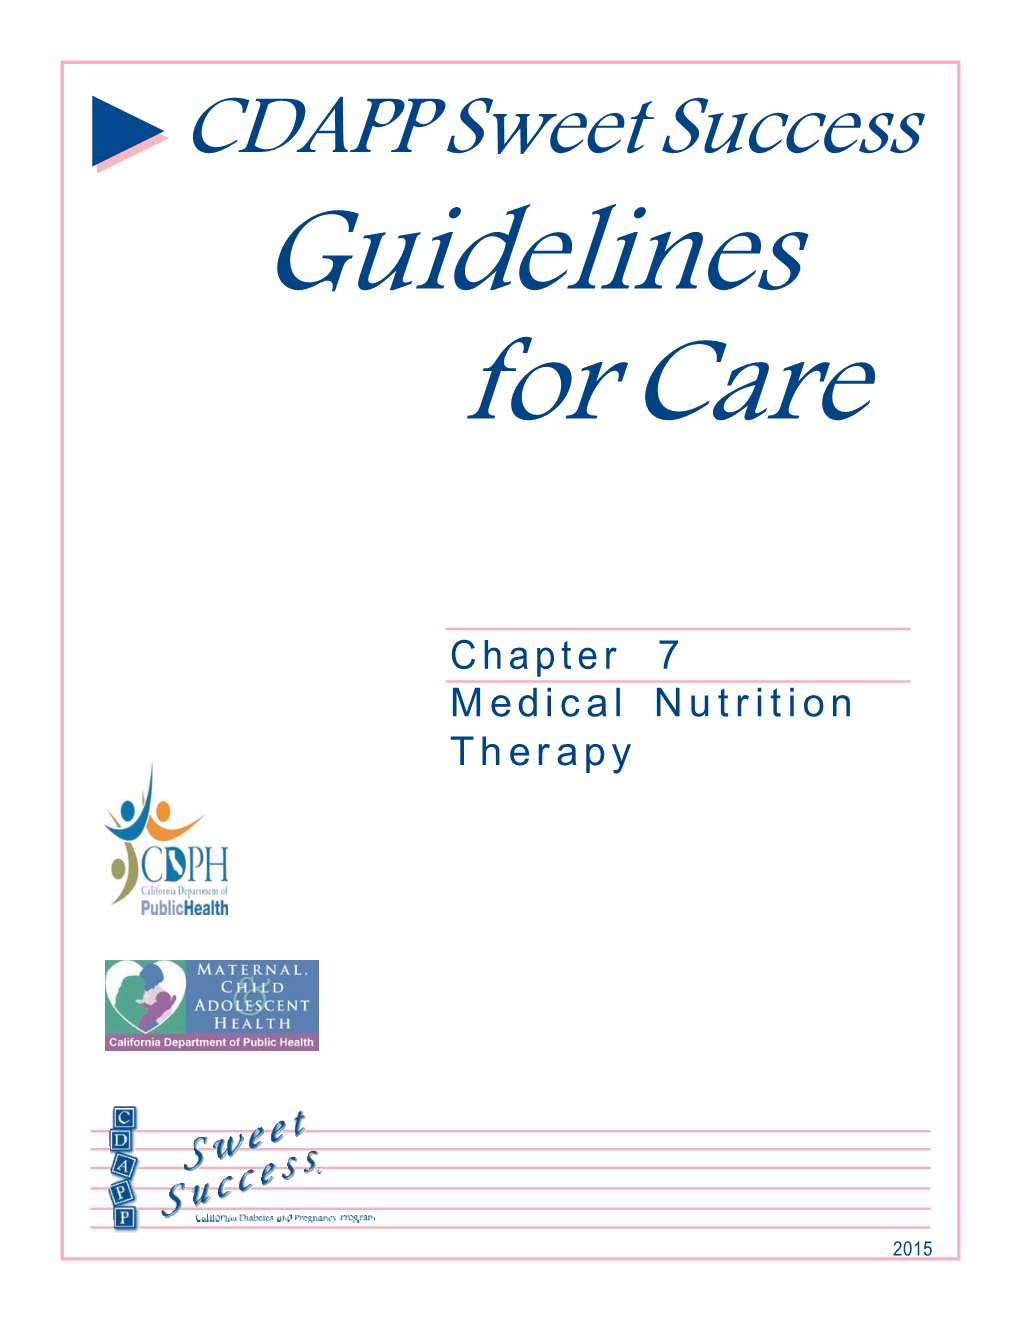 Chapter 7: Medical Nutrition Therapy